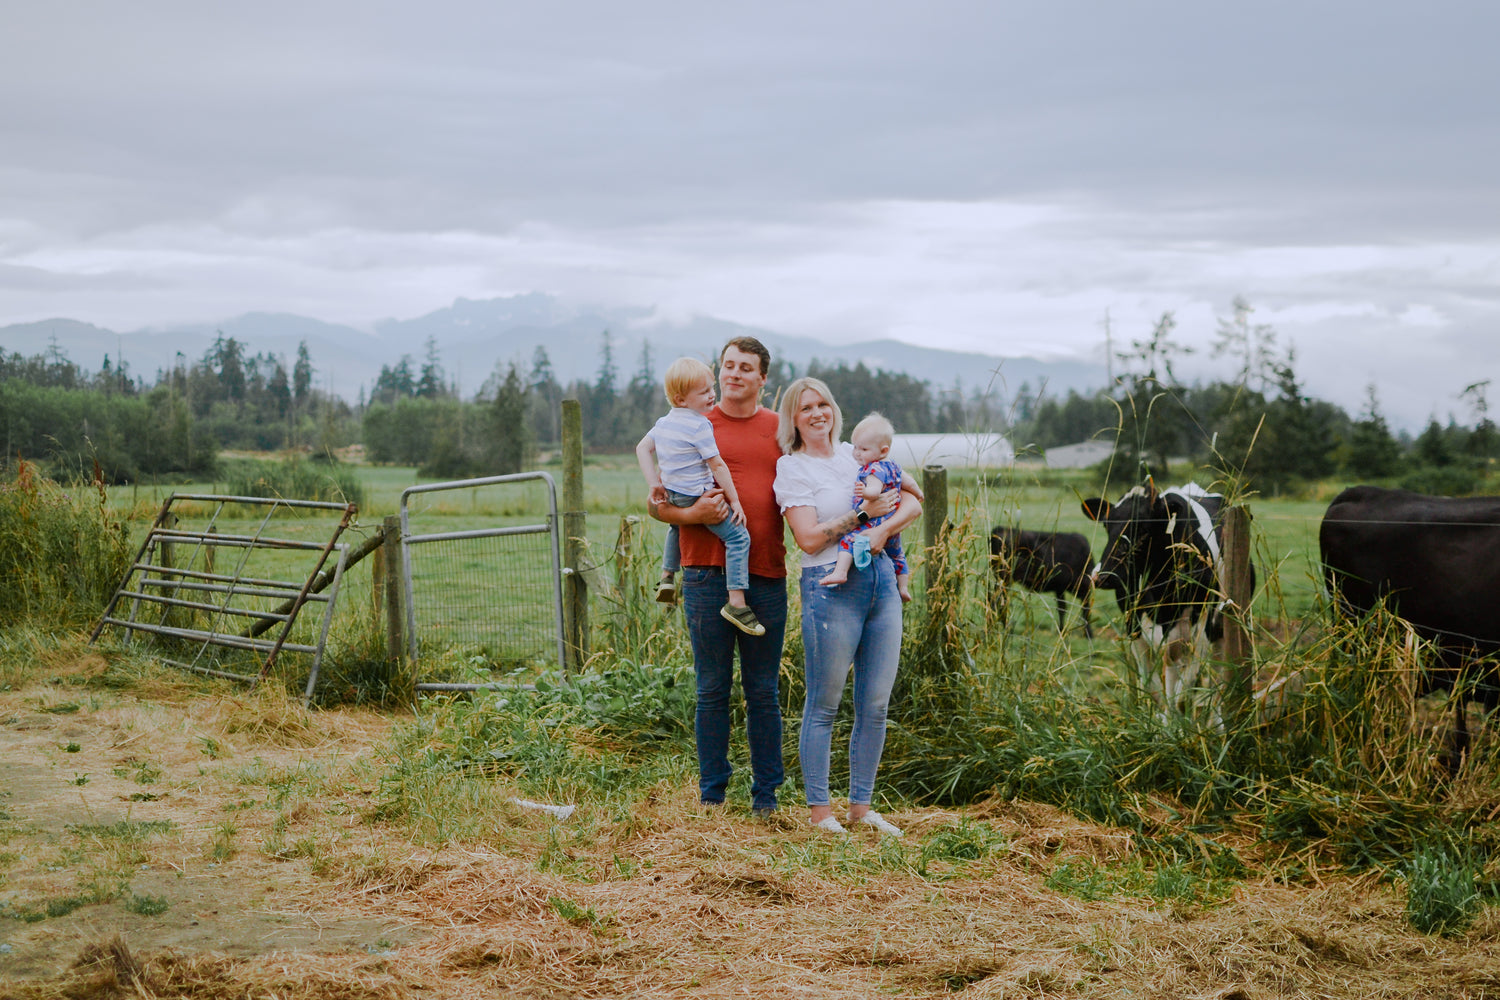 Albert Gorter, Chelsea Enns, and their two children at the edge of a field with cows grazing.